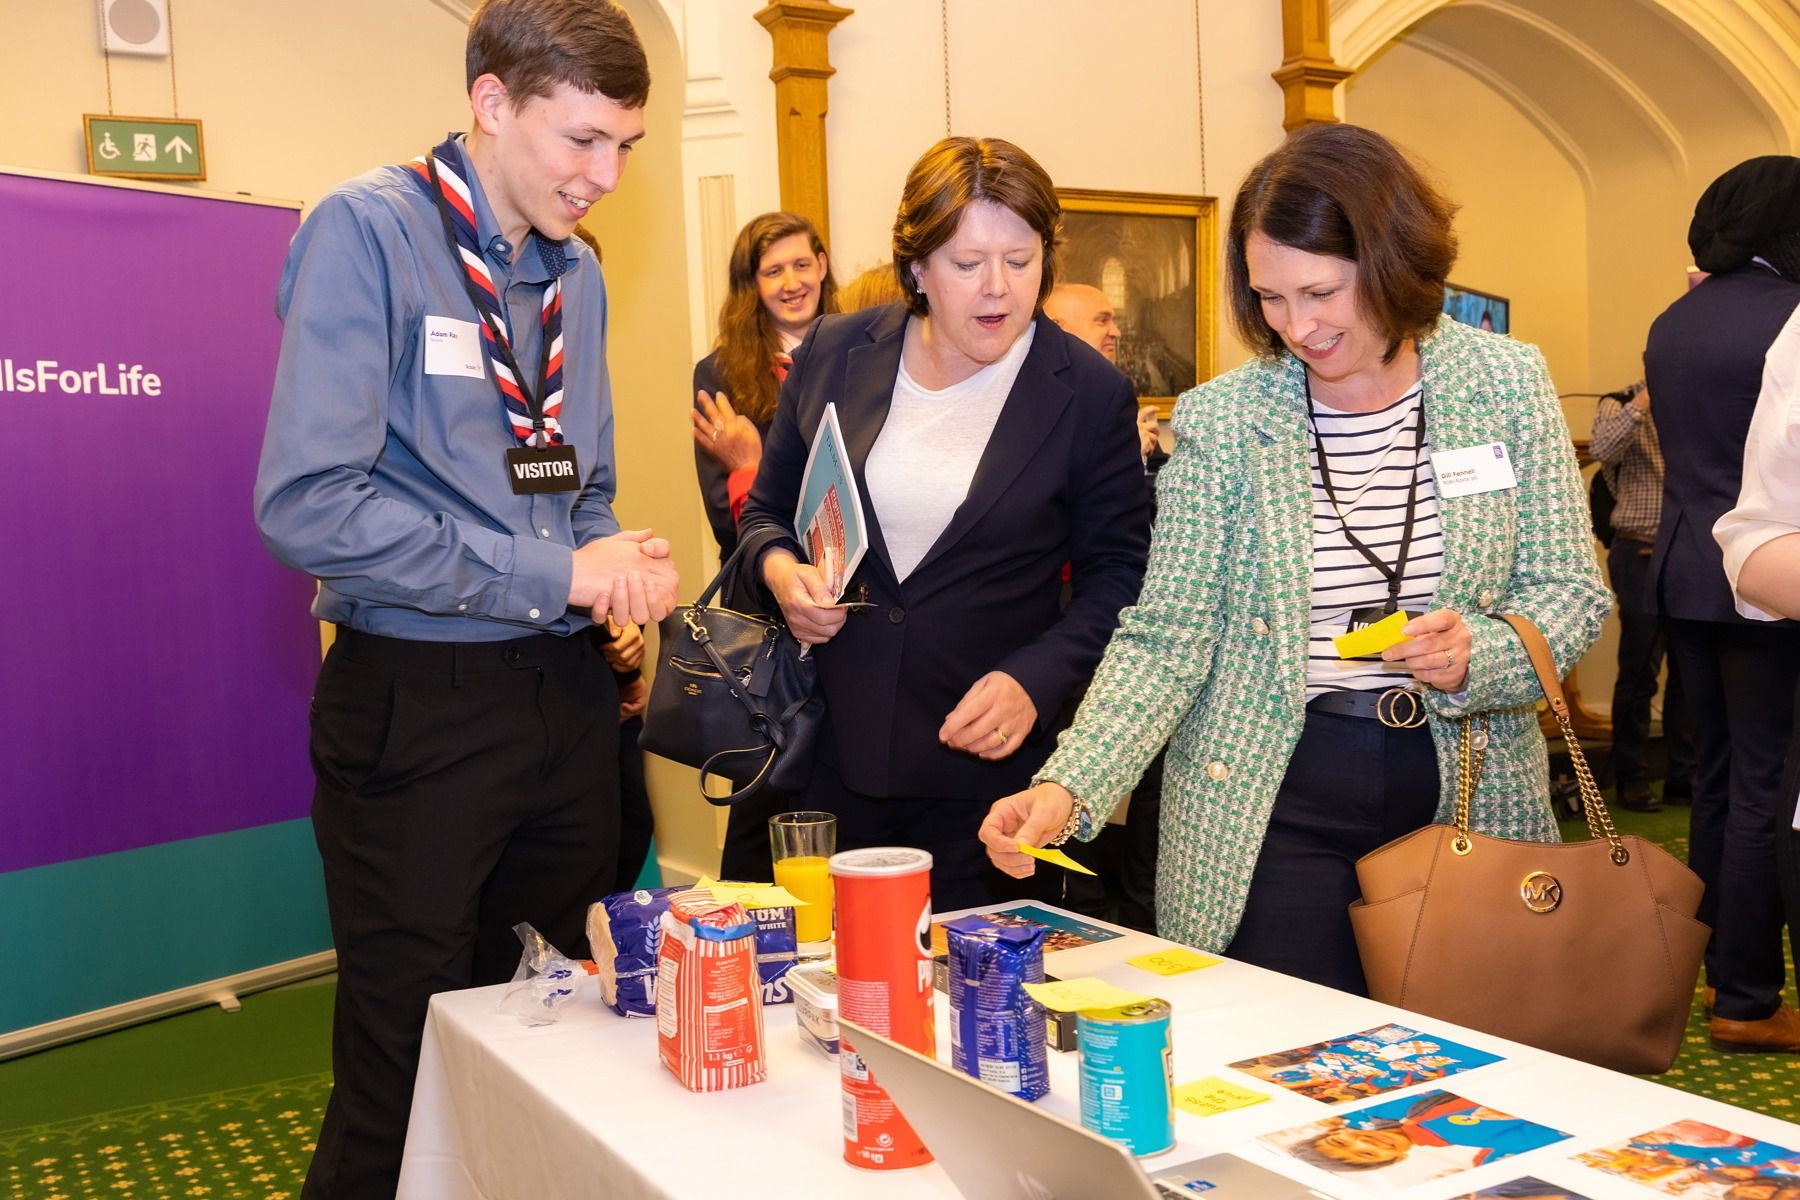 Three Scout members at Parliament are looking at a table with crisps, flour, bread, rice and beans and leaflets. One visitor in a green and white blazer jacket holds up some yellow sticky notes and each member is looking at them to read what they say.